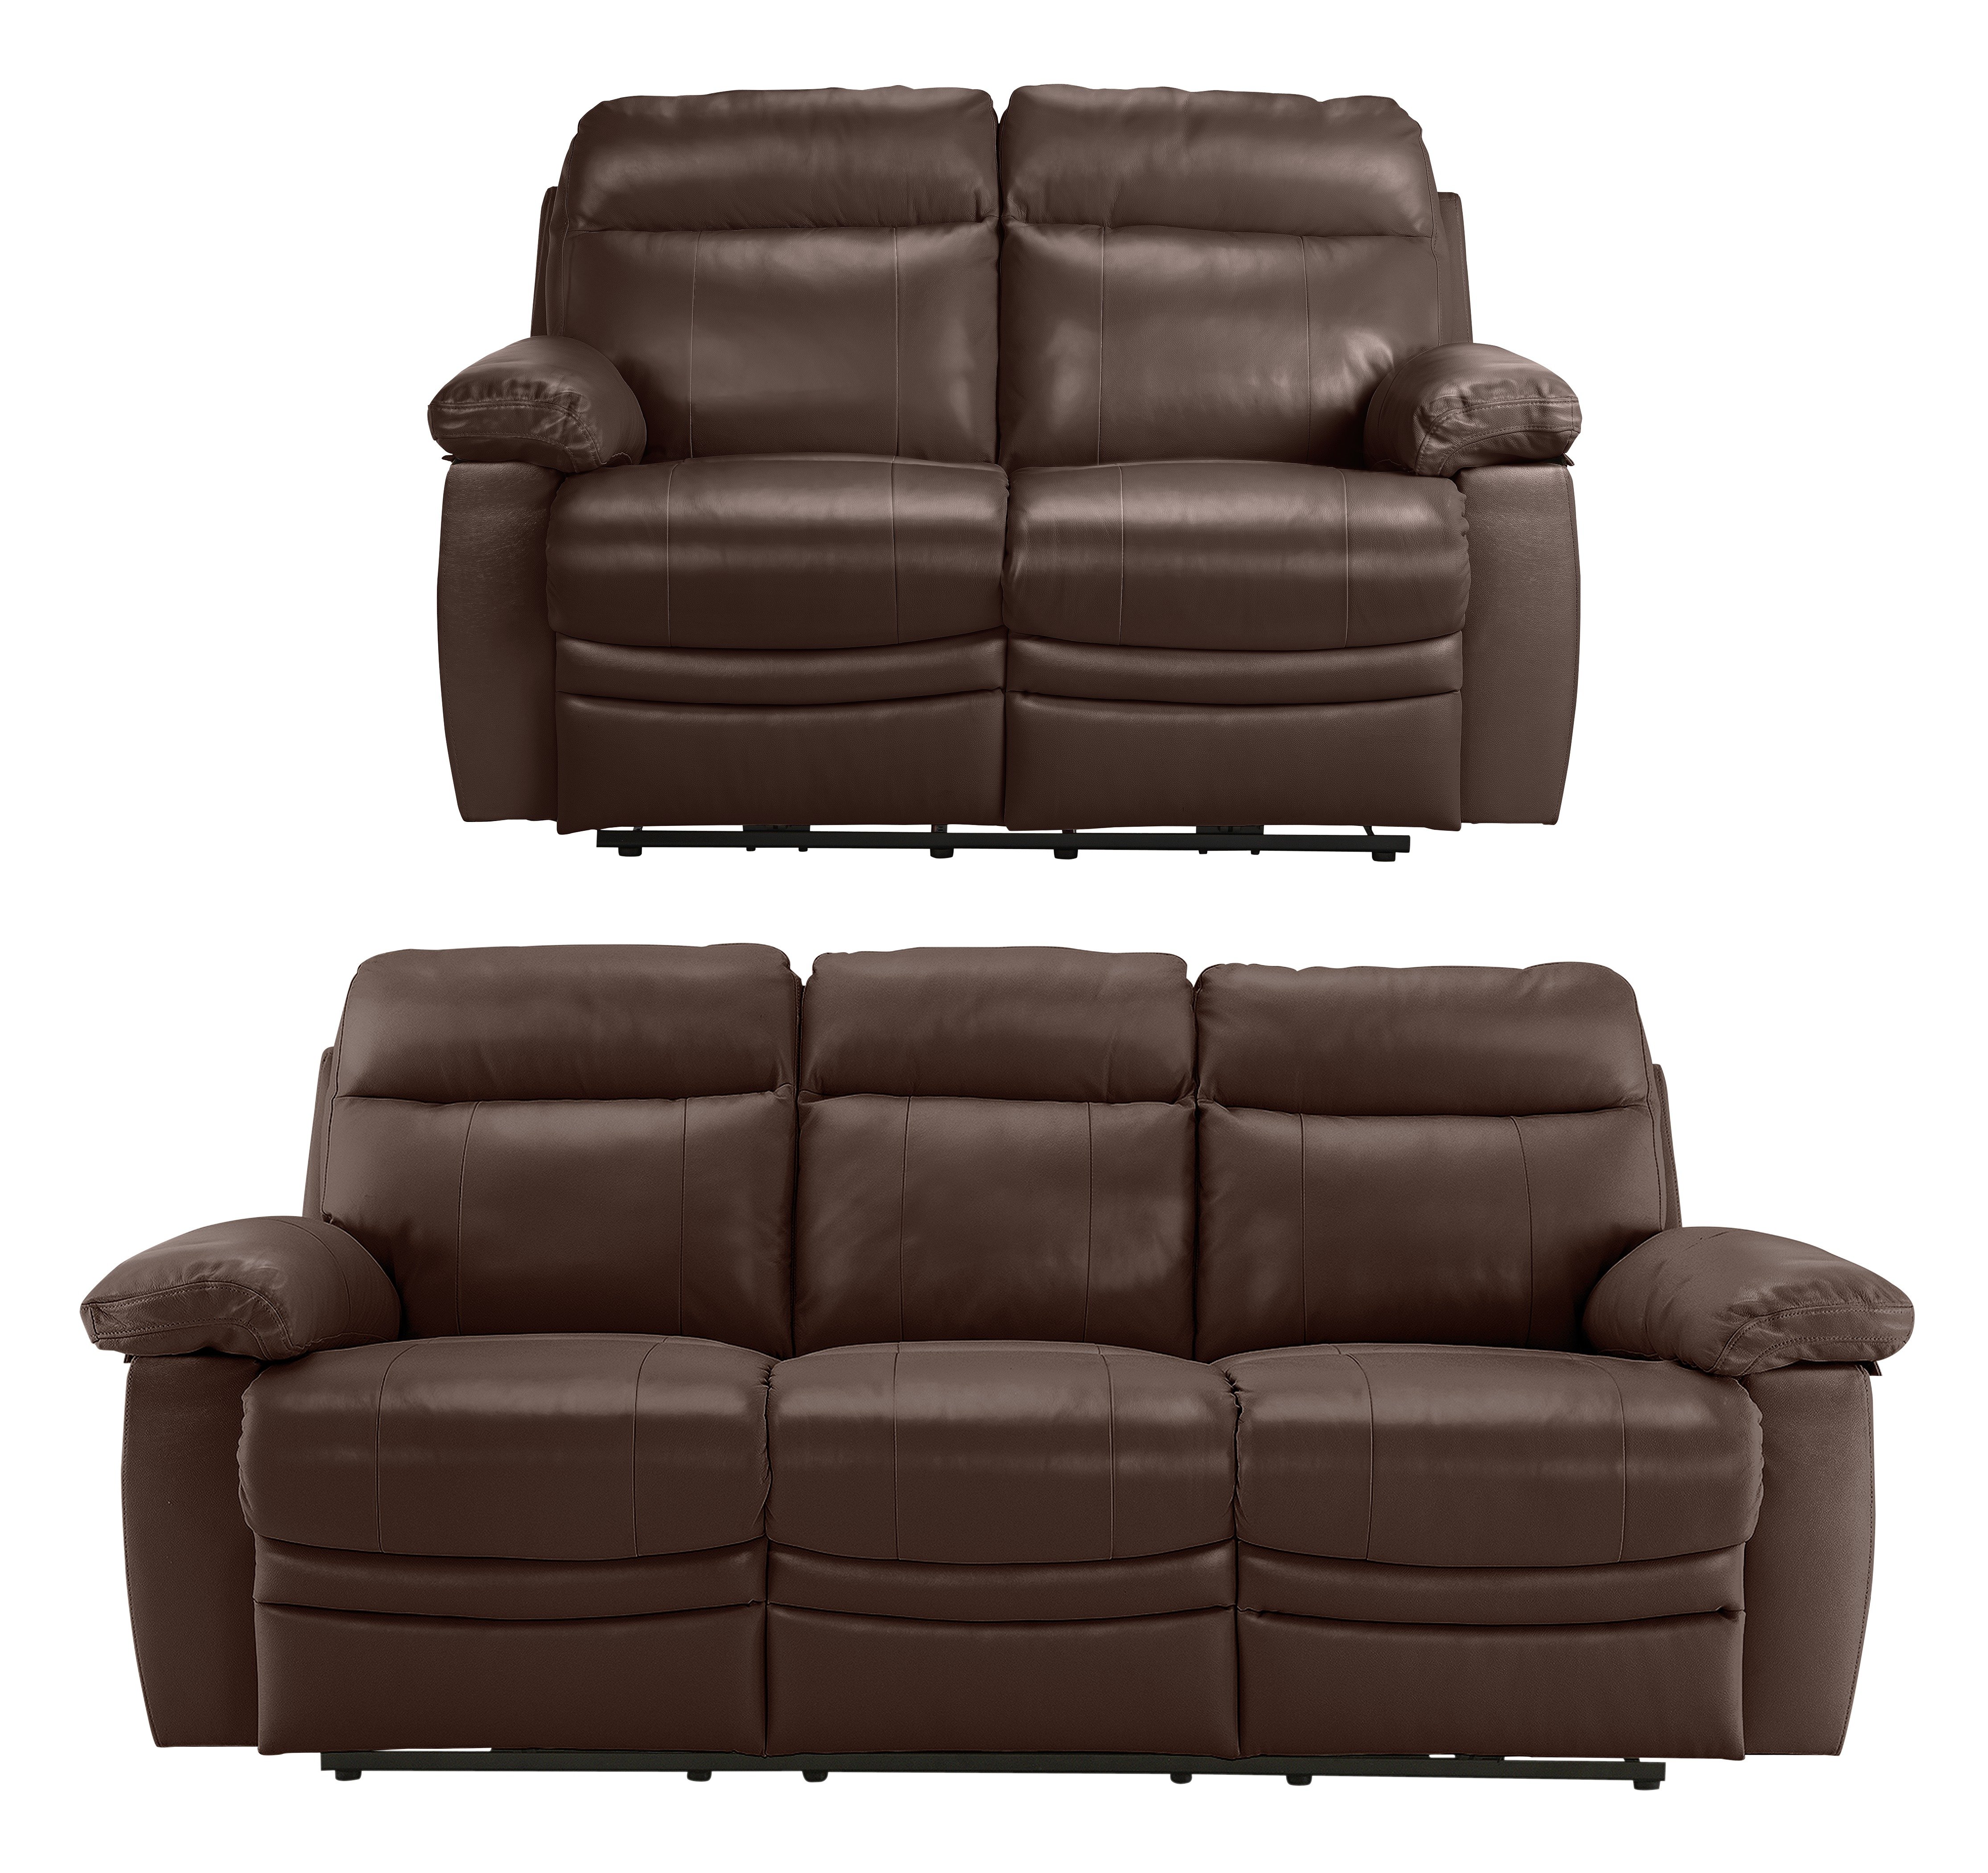 Argos Home Paolo 2 & 3 Seater Power Recliner Sofas - Brown